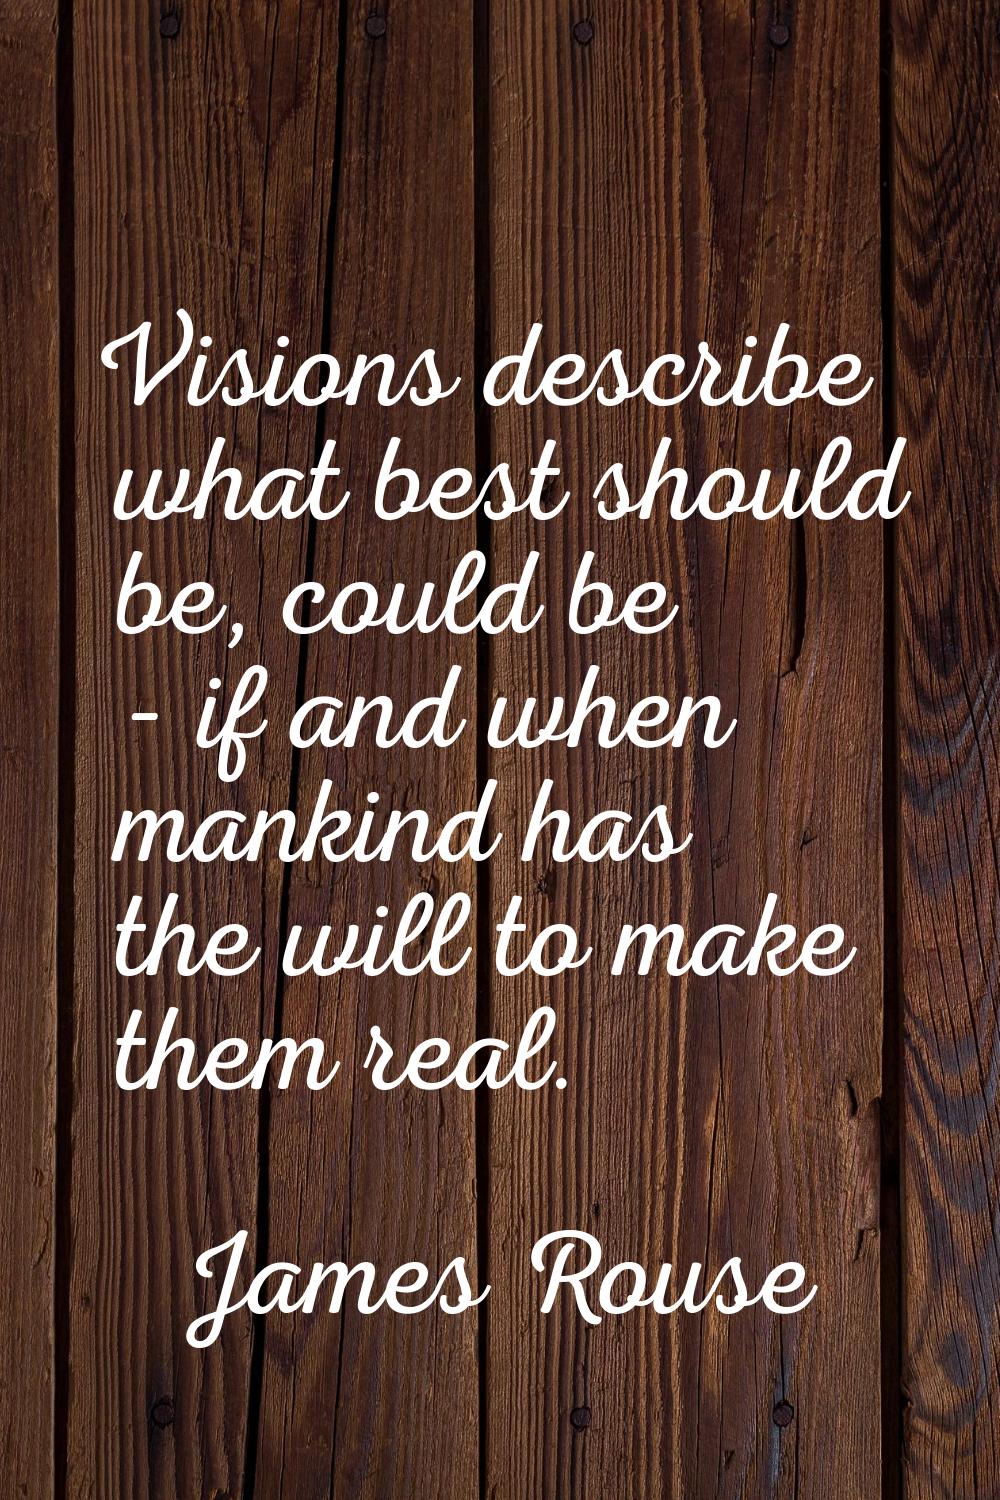 Visions describe what best should be, could be - if and when mankind has the will to make them real